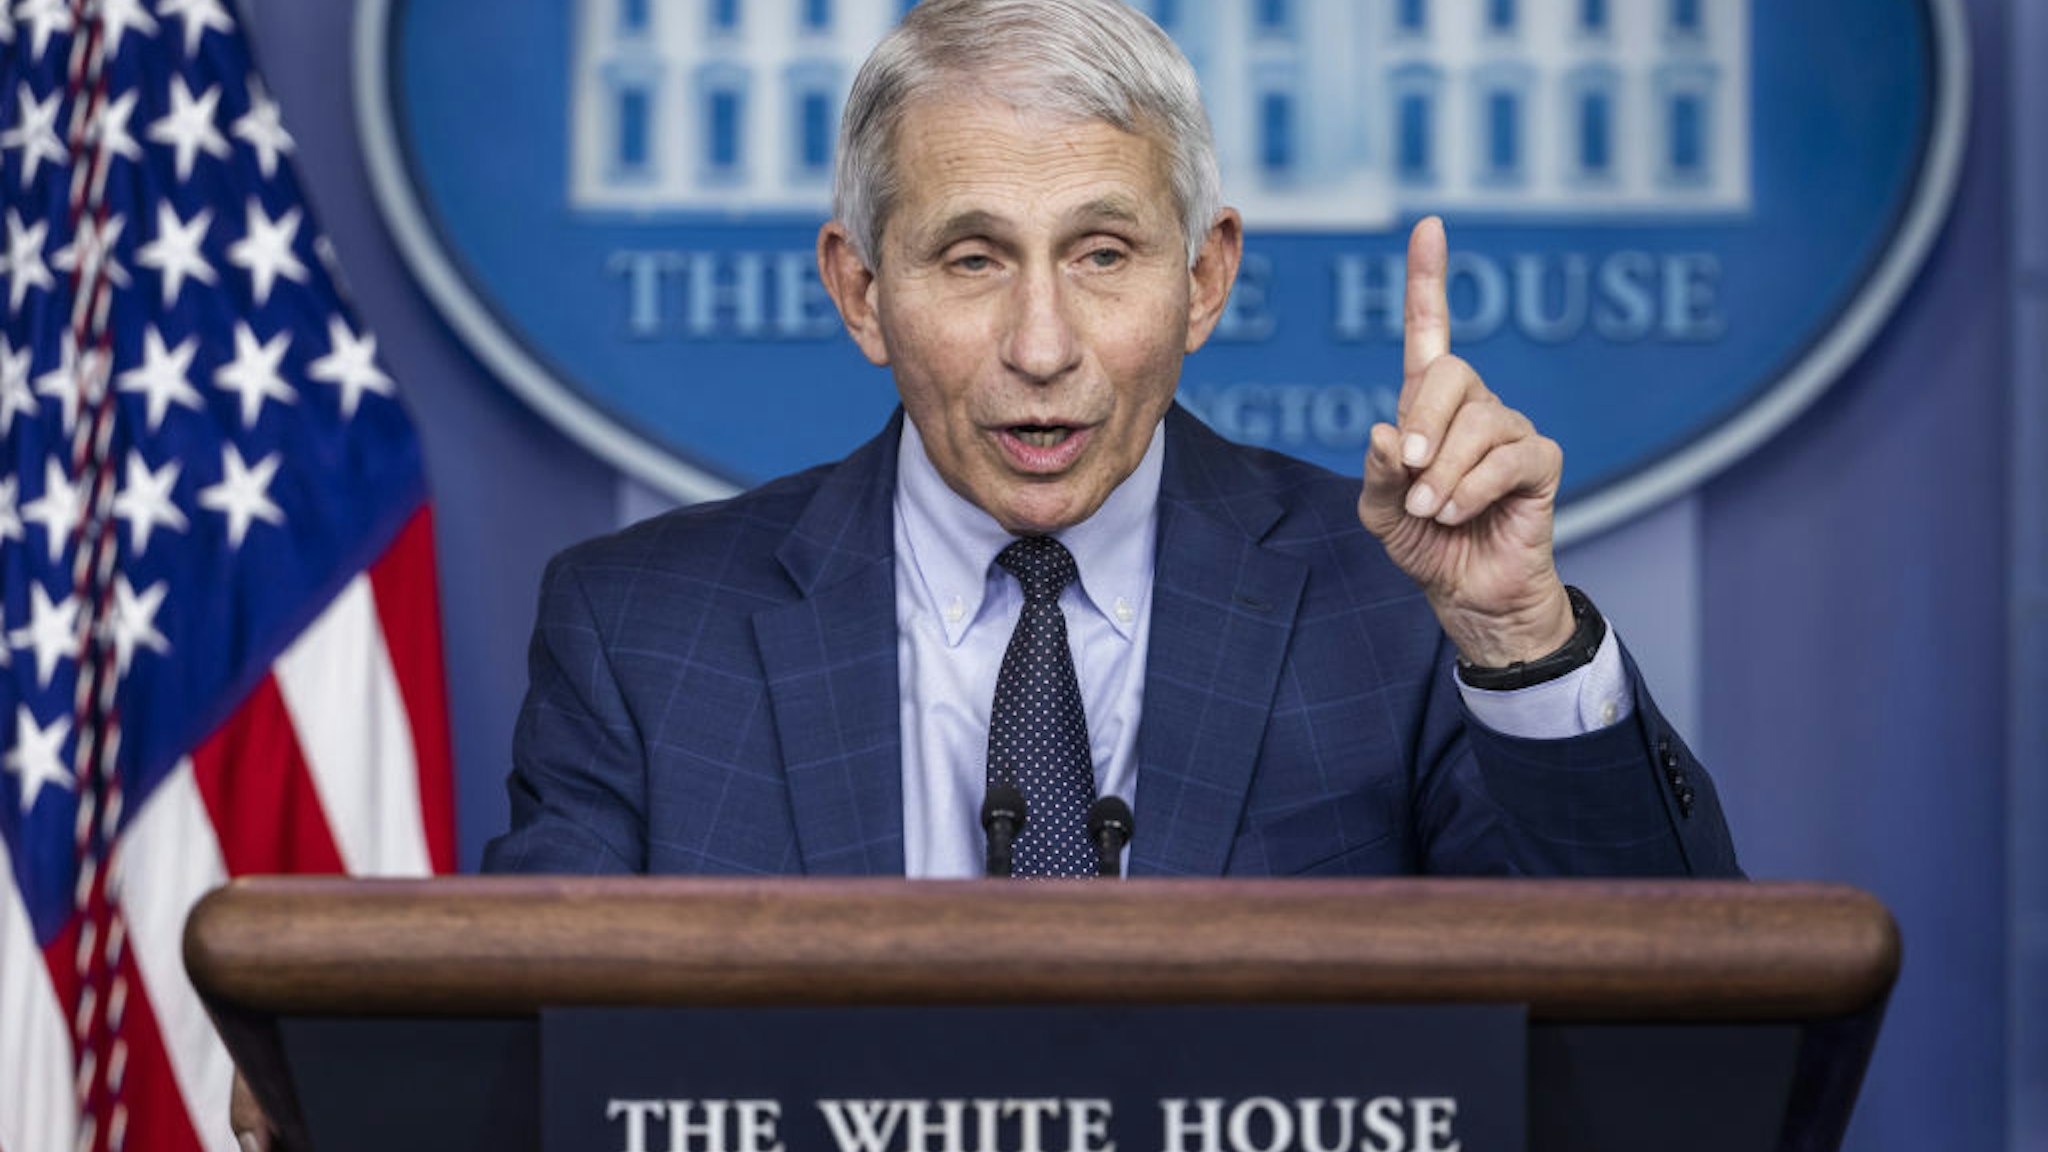 Anthony Fauci, director of the National Institute of Allergy and Infectious Diseases, speaks during a news conference in the James S. Brady Press Briefing Room at the White House in Washington, D.C., U.S., on Wednesday, Dec. 1, 2021. The U.S. Centers for Disease Control and Prevention has confirmed the first U.S. case of omicron as the new variant spreads around the world. Photographer: Jim Lo Scalzo/EPA/Bloomberg via Getty Images